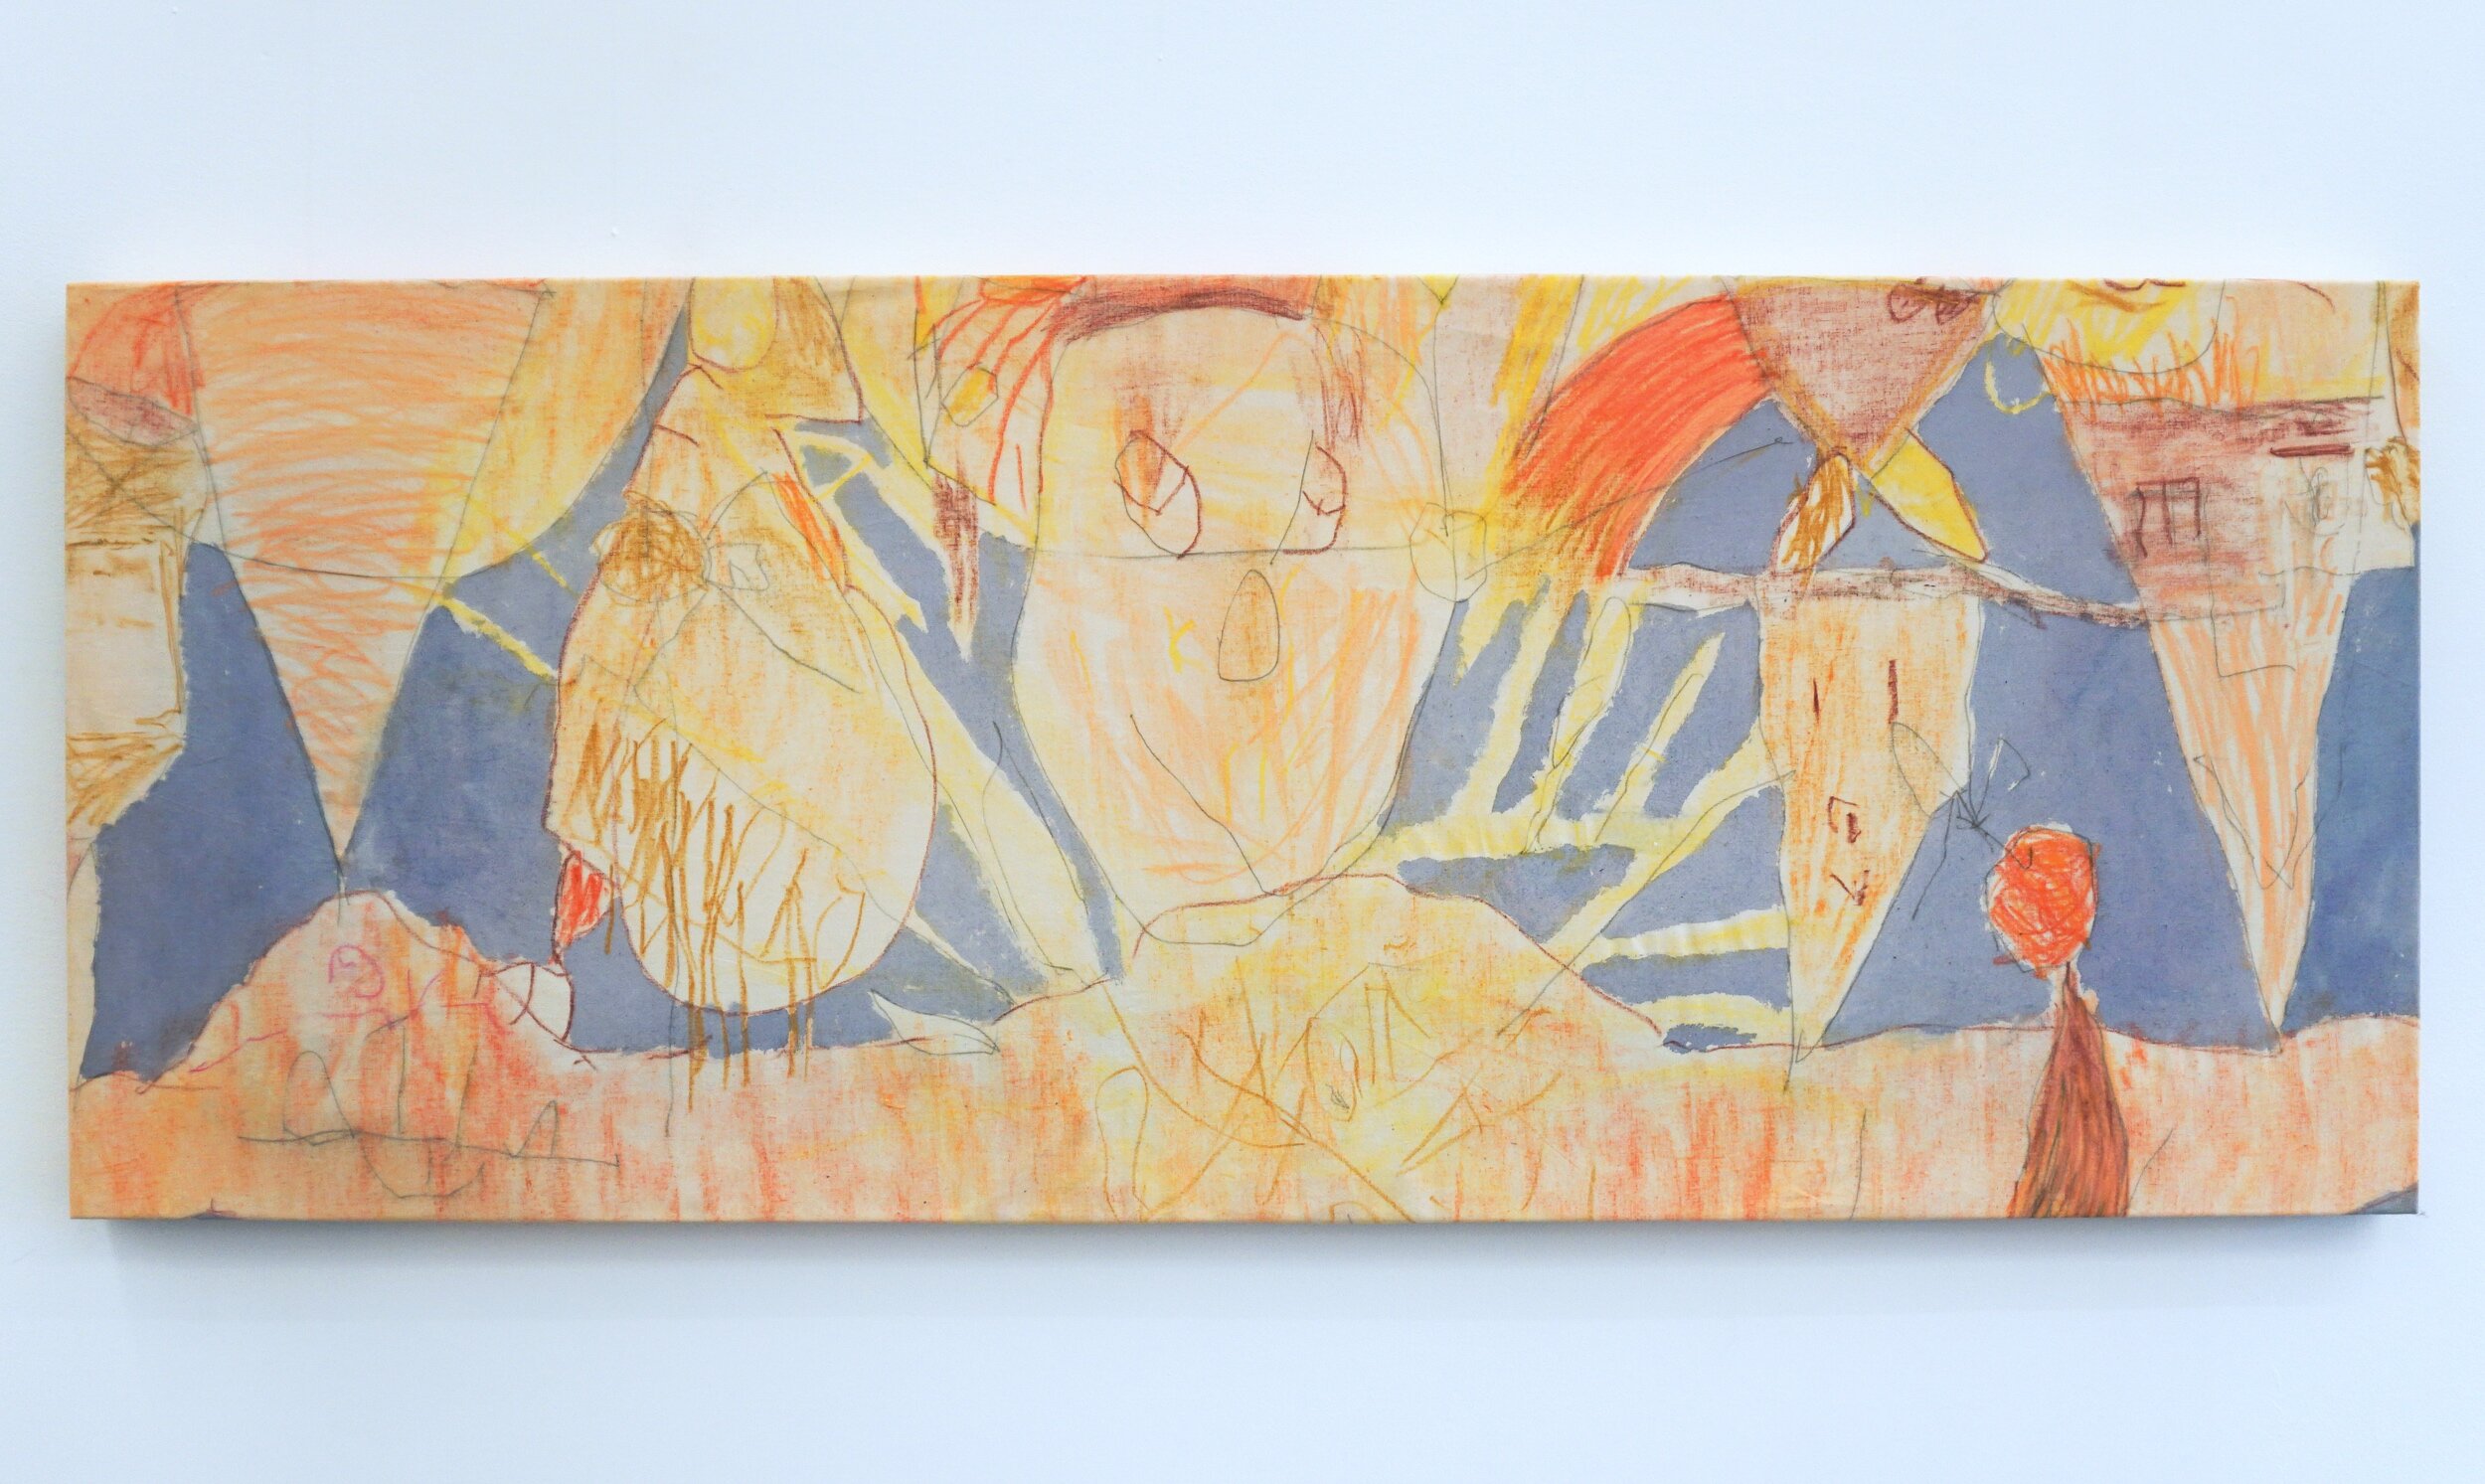  Ross Simonini   The Sures , 2020  Watercolor, tempera, wax crayon, and graphite on muslin  24 x 60 inches 